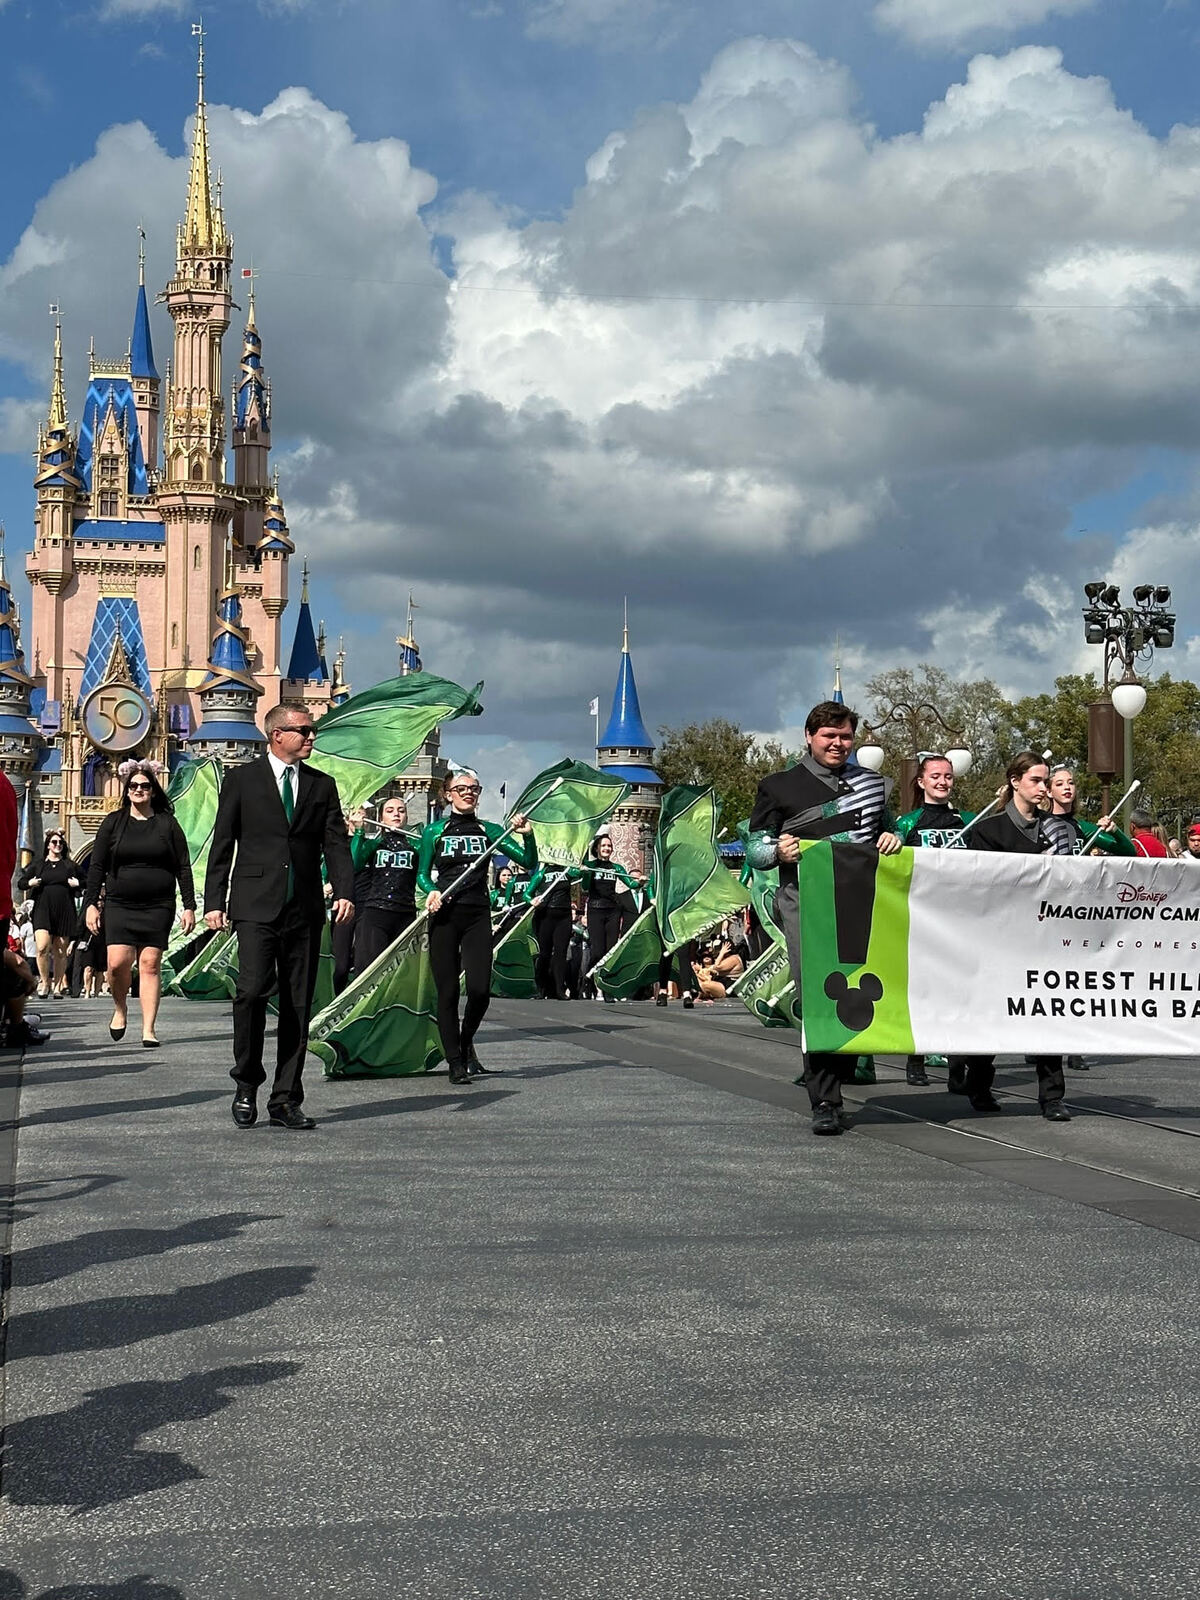 Marching Band in Disney World Parade